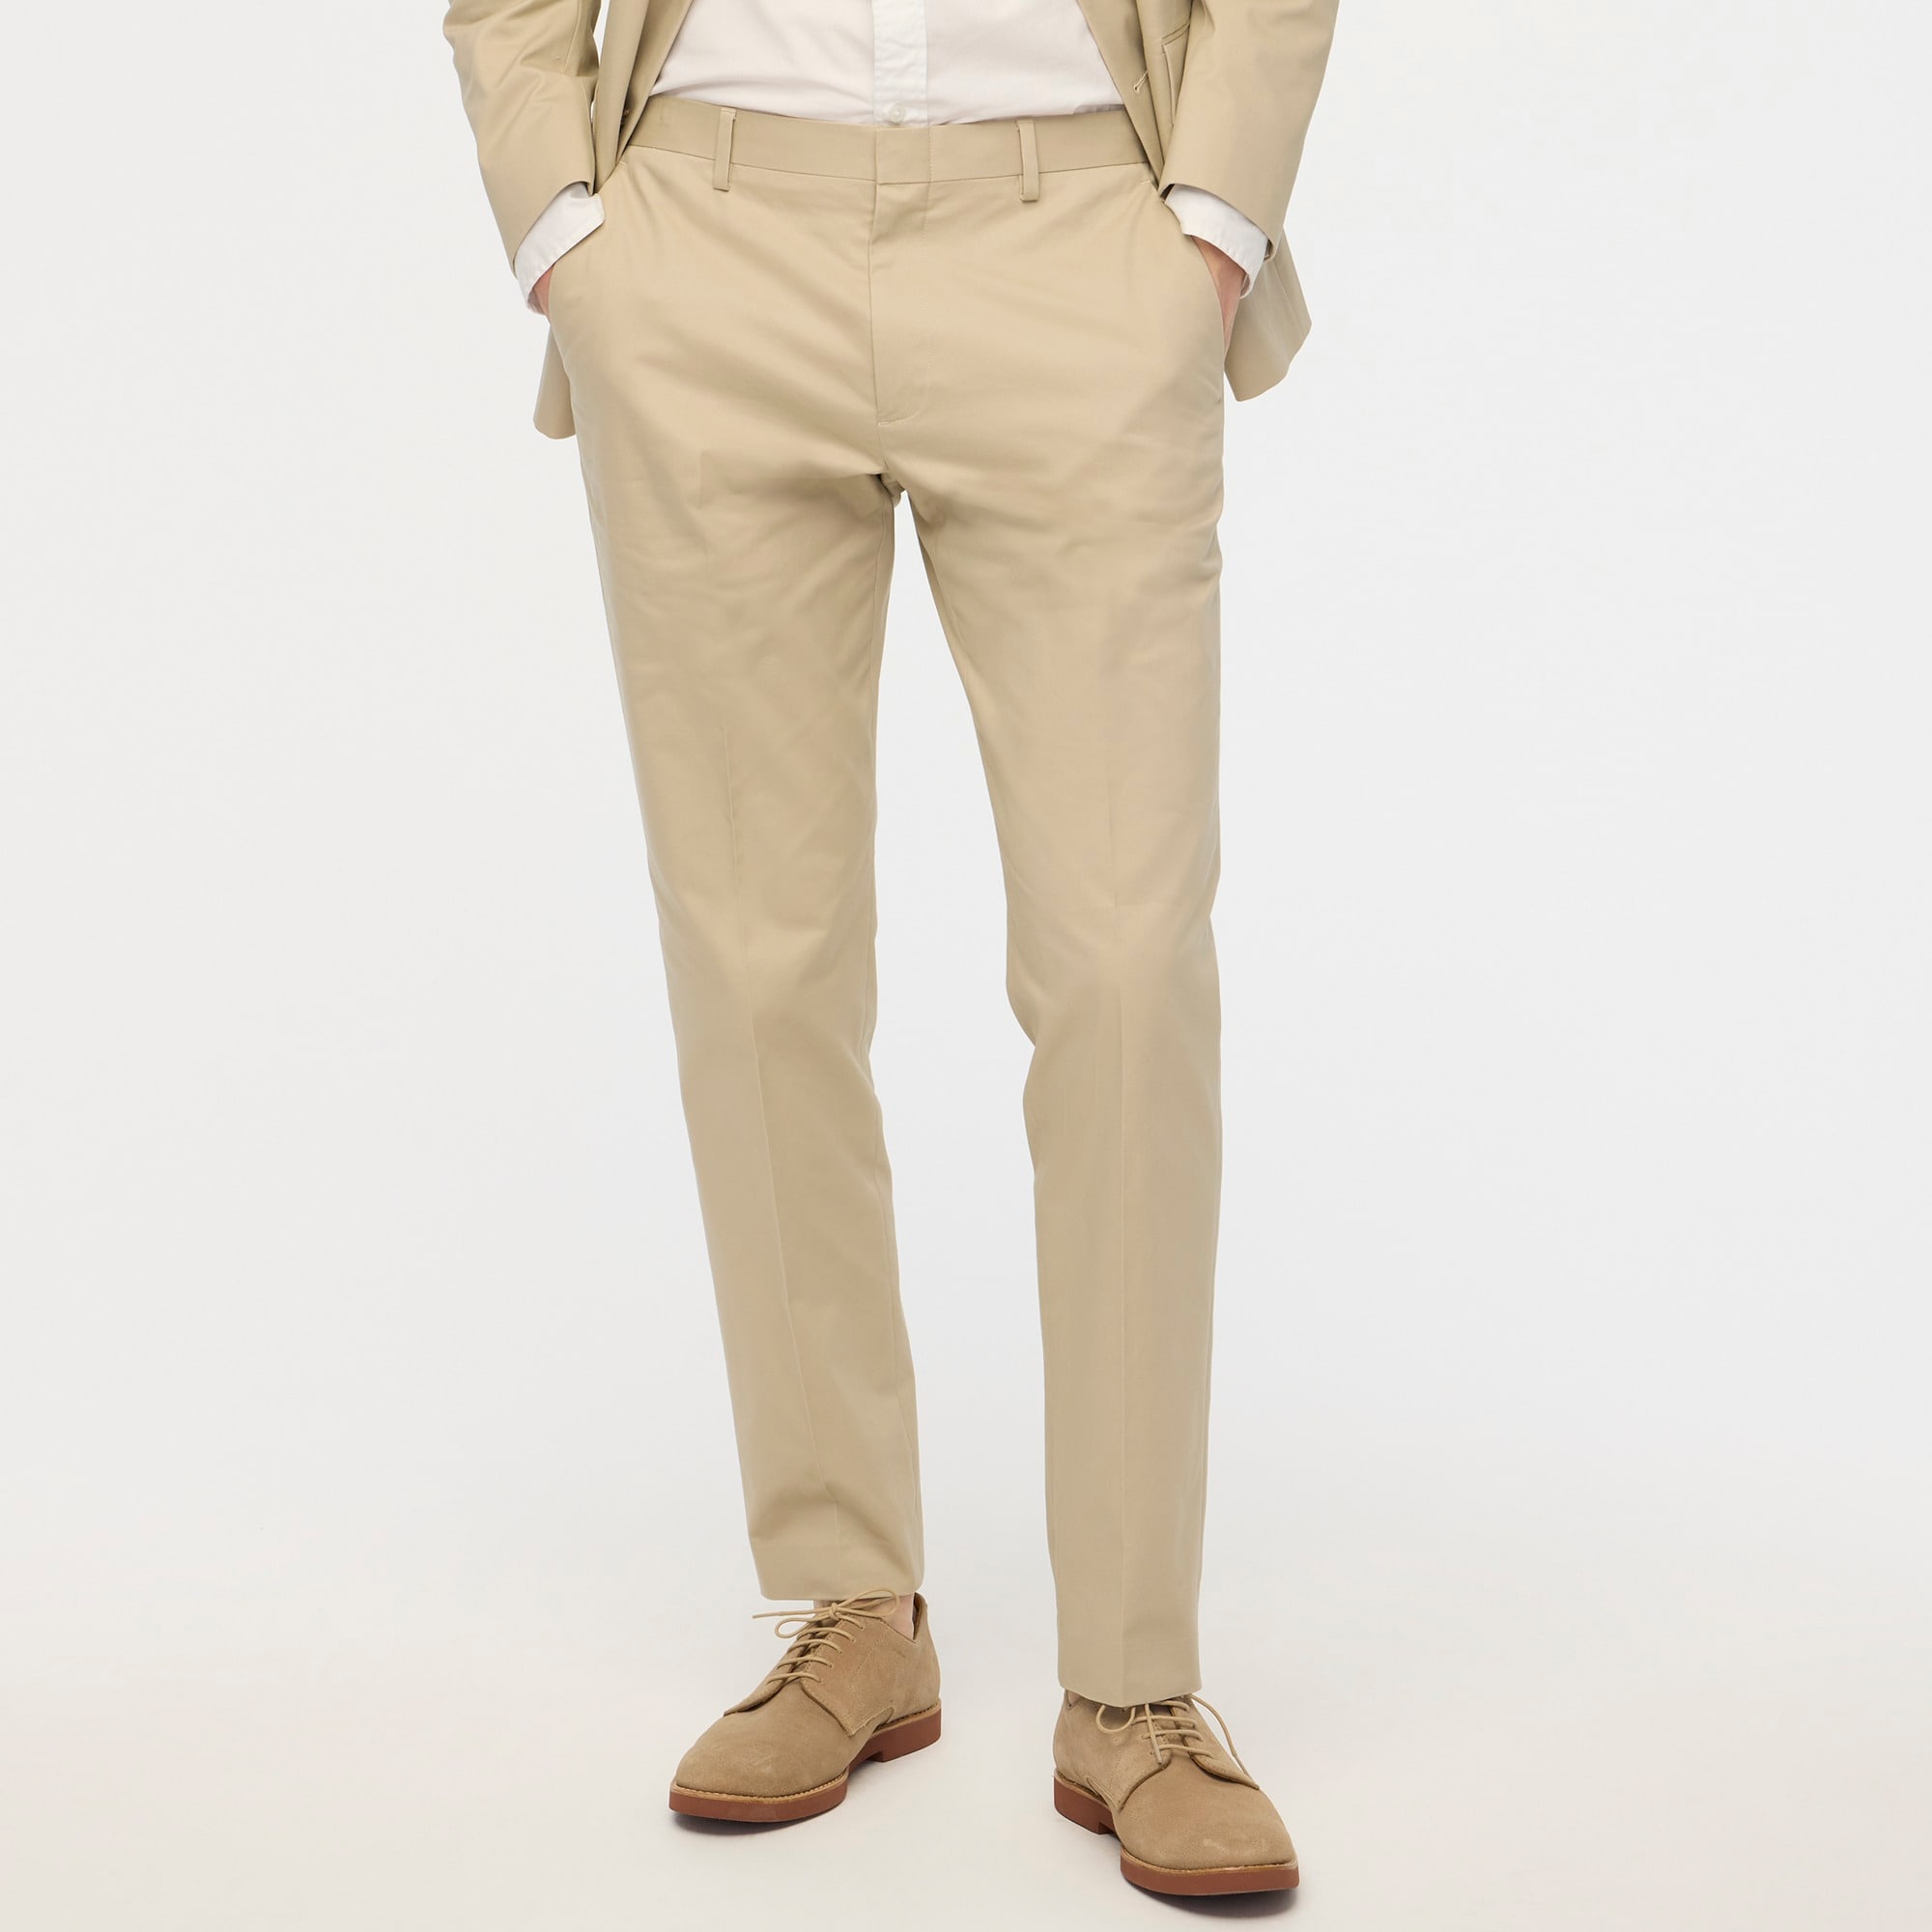 Jcrew Stretch suit pant in flex chino